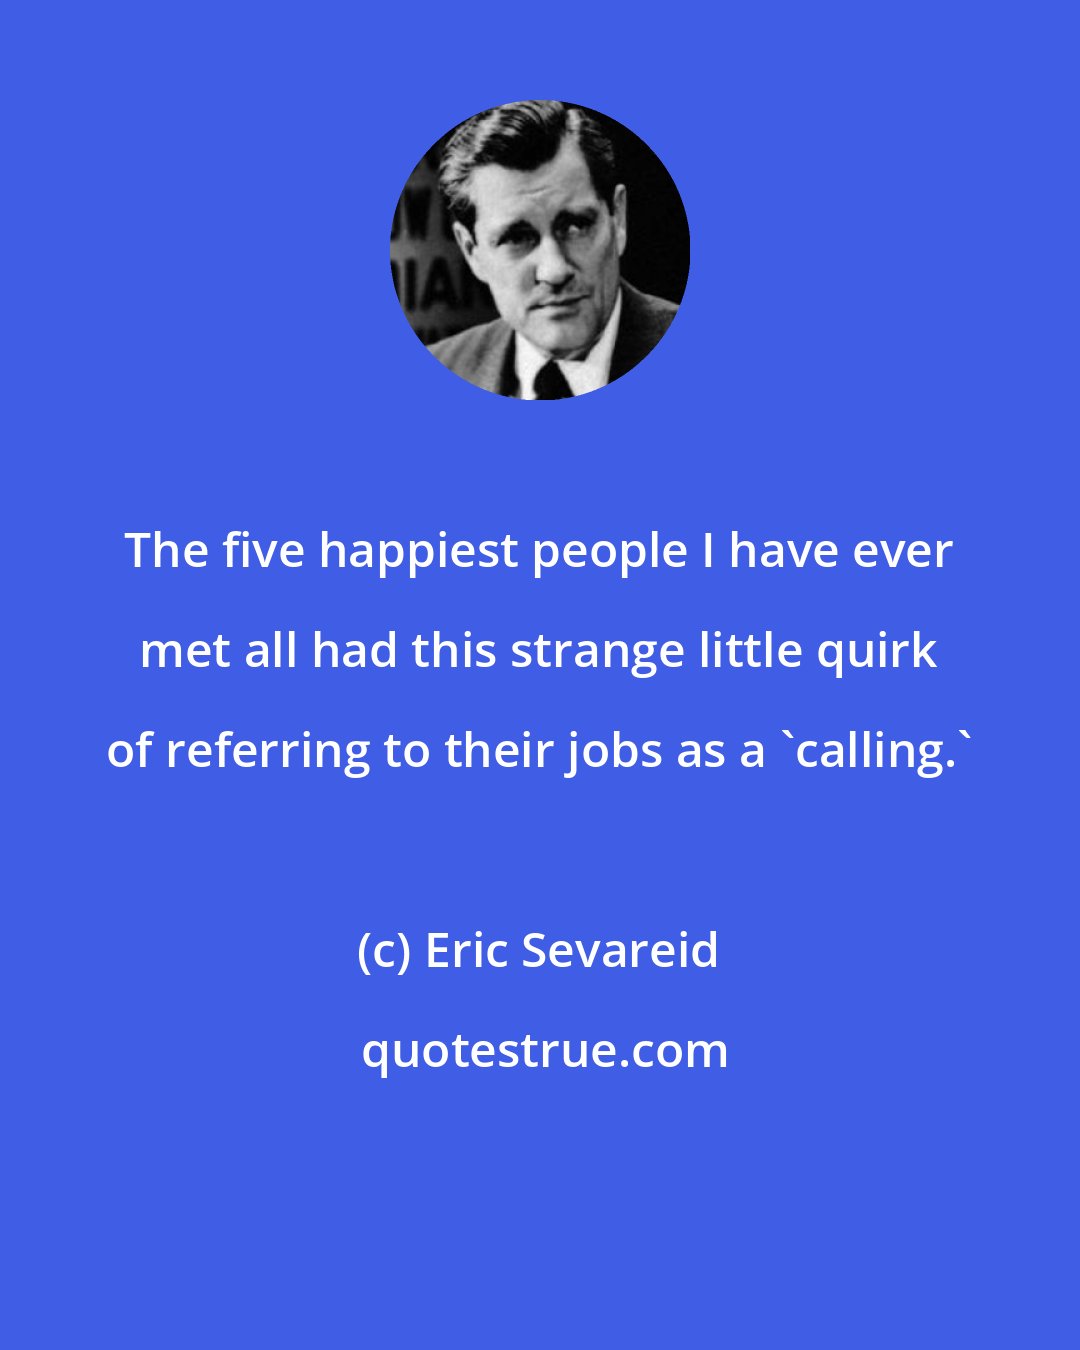 Eric Sevareid: The five happiest people I have ever met all had this strange little quirk of referring to their jobs as a 'calling.'